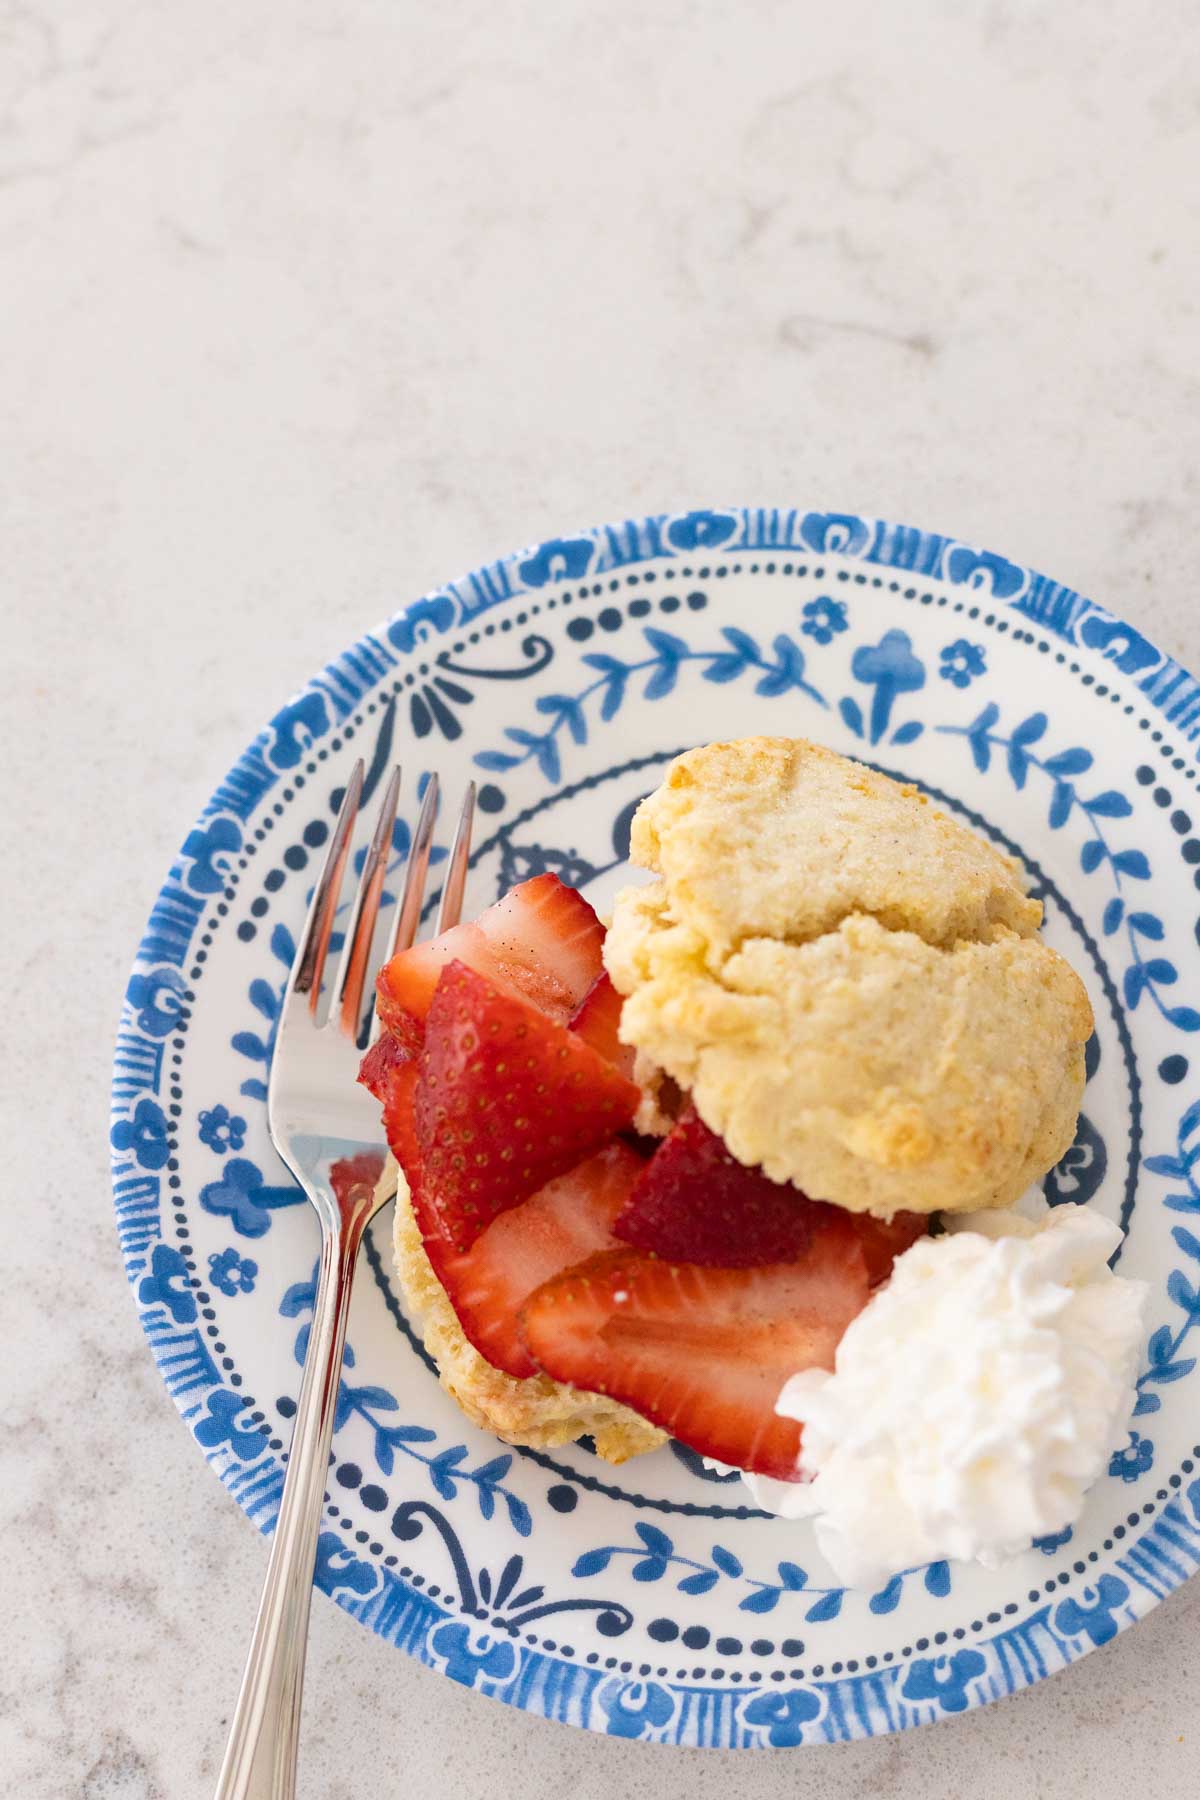 The shortcake has been split in 2. Fresh strawberries are on one half and a dollop of whipped cream is on the side.